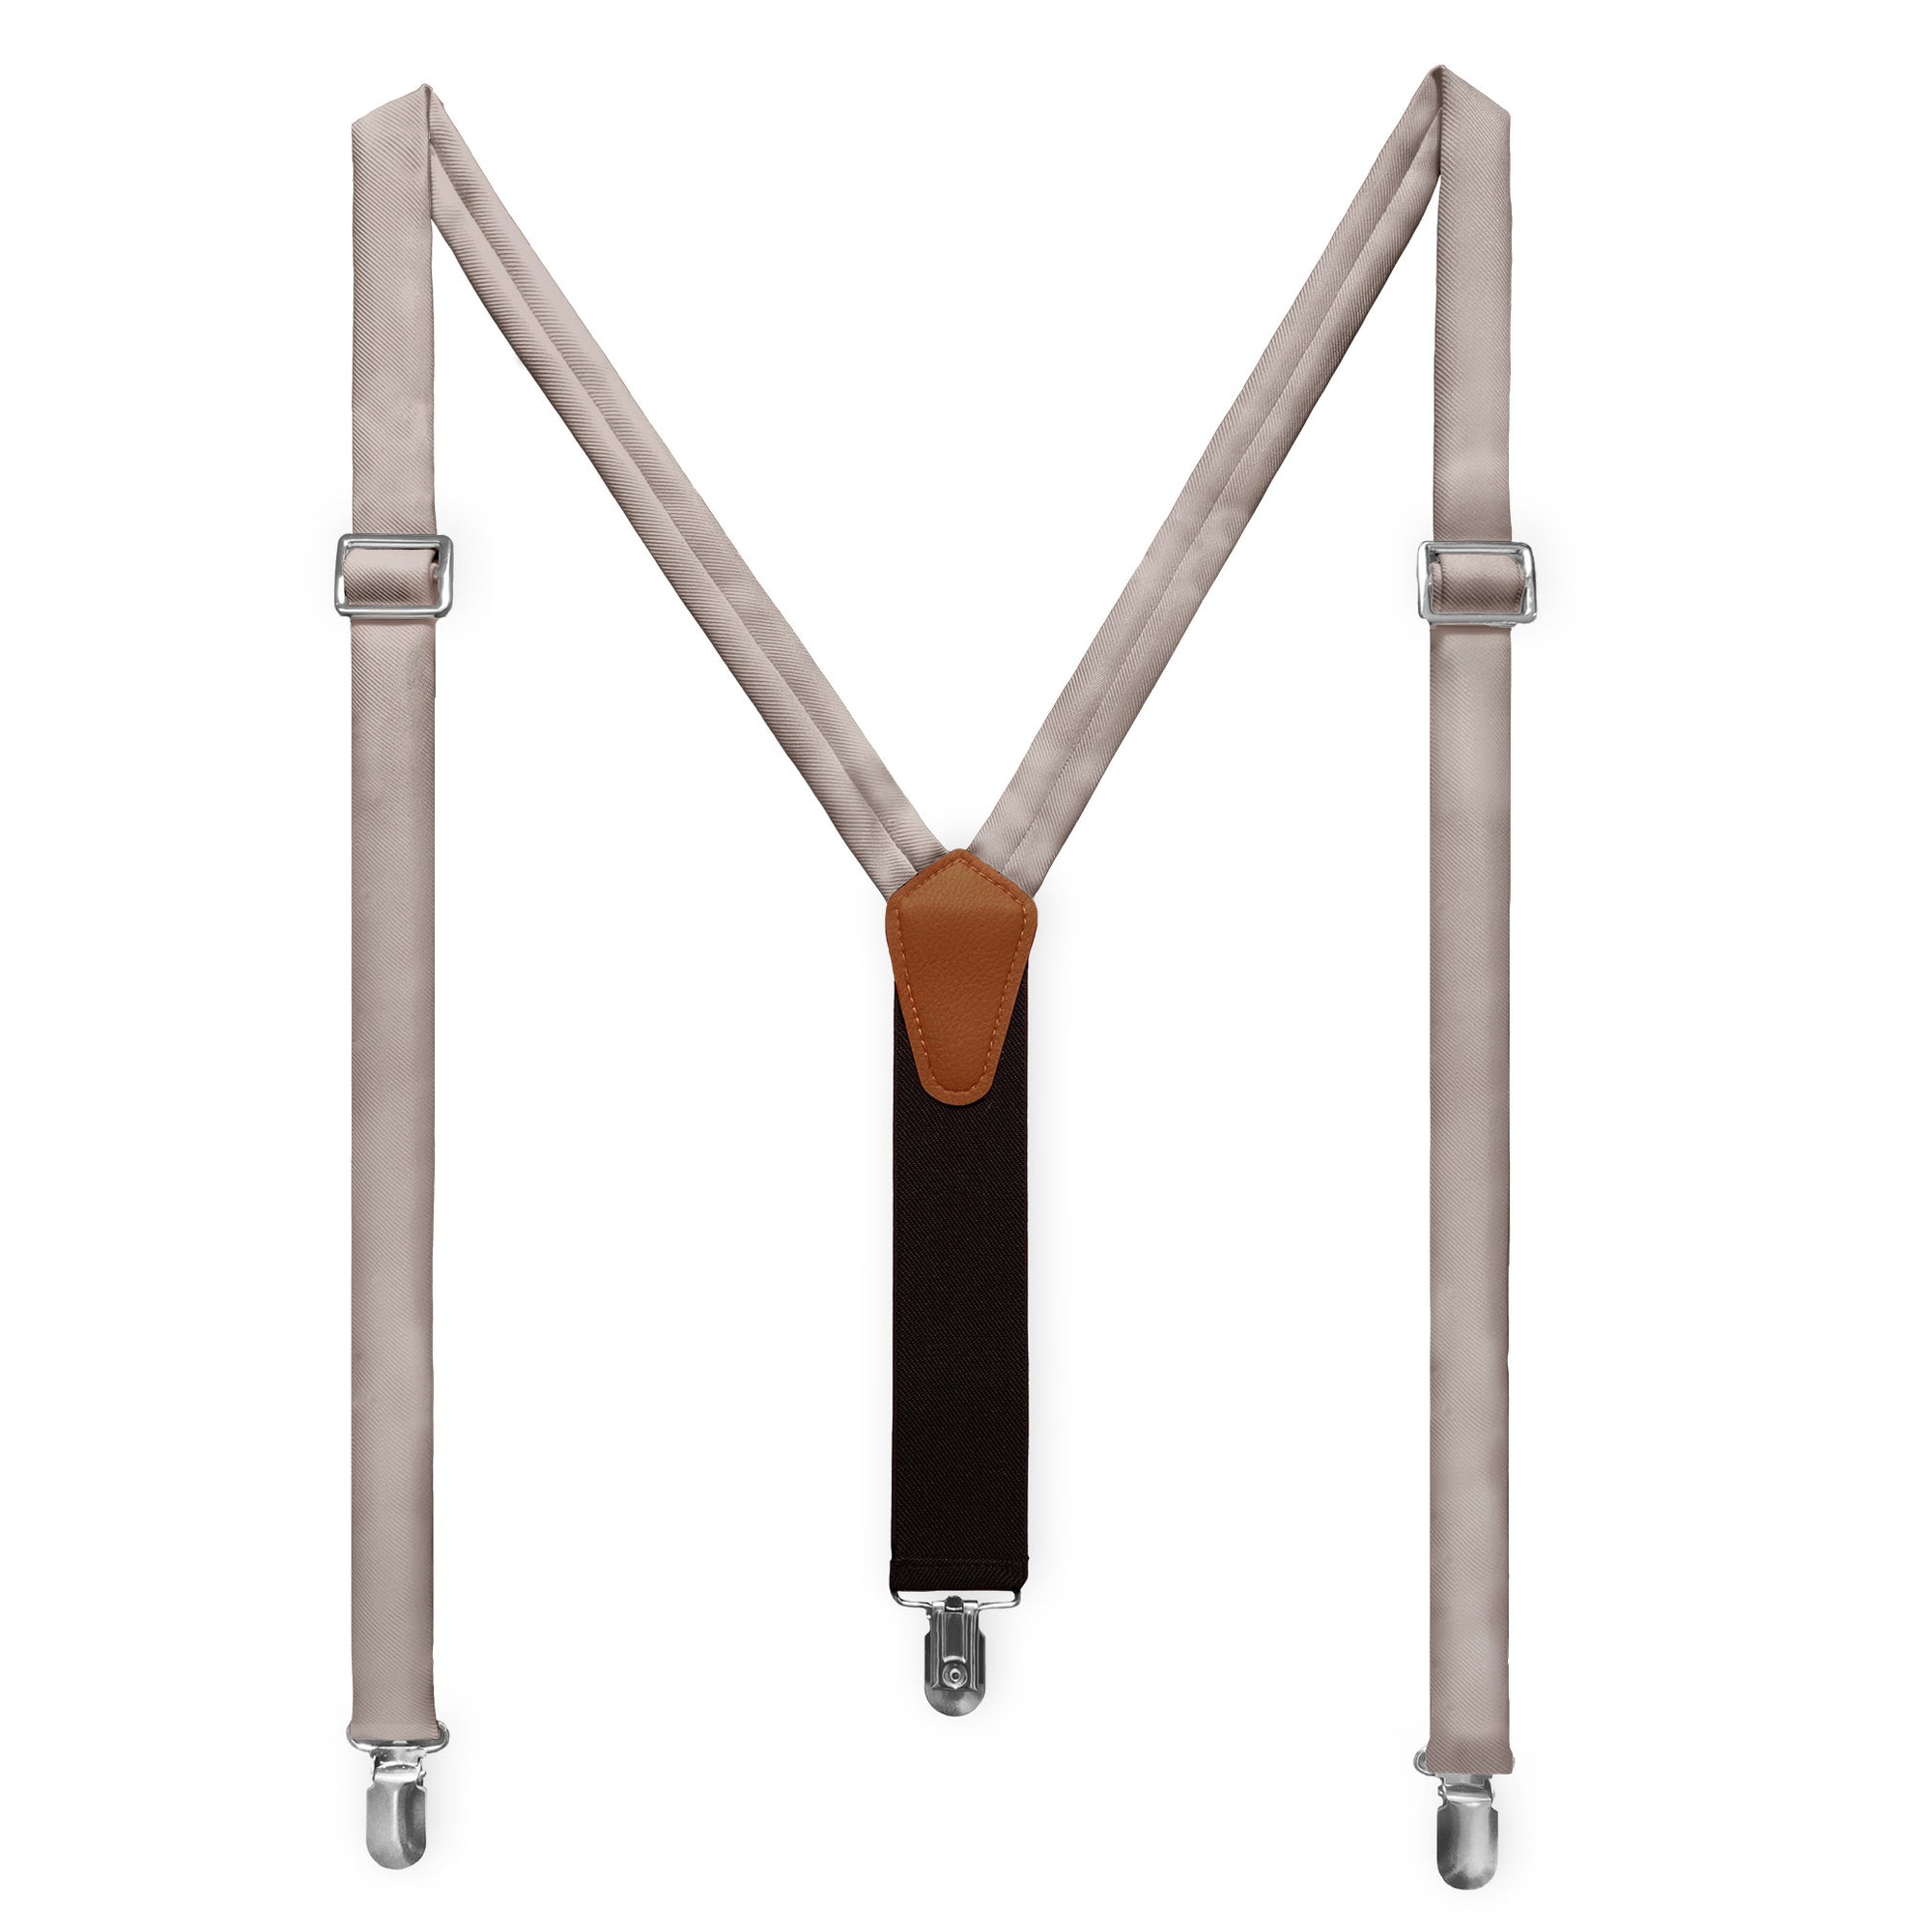 Azazie Taupe Suspenders - Adult Short 36-40" -  - Knotty Tie Co.